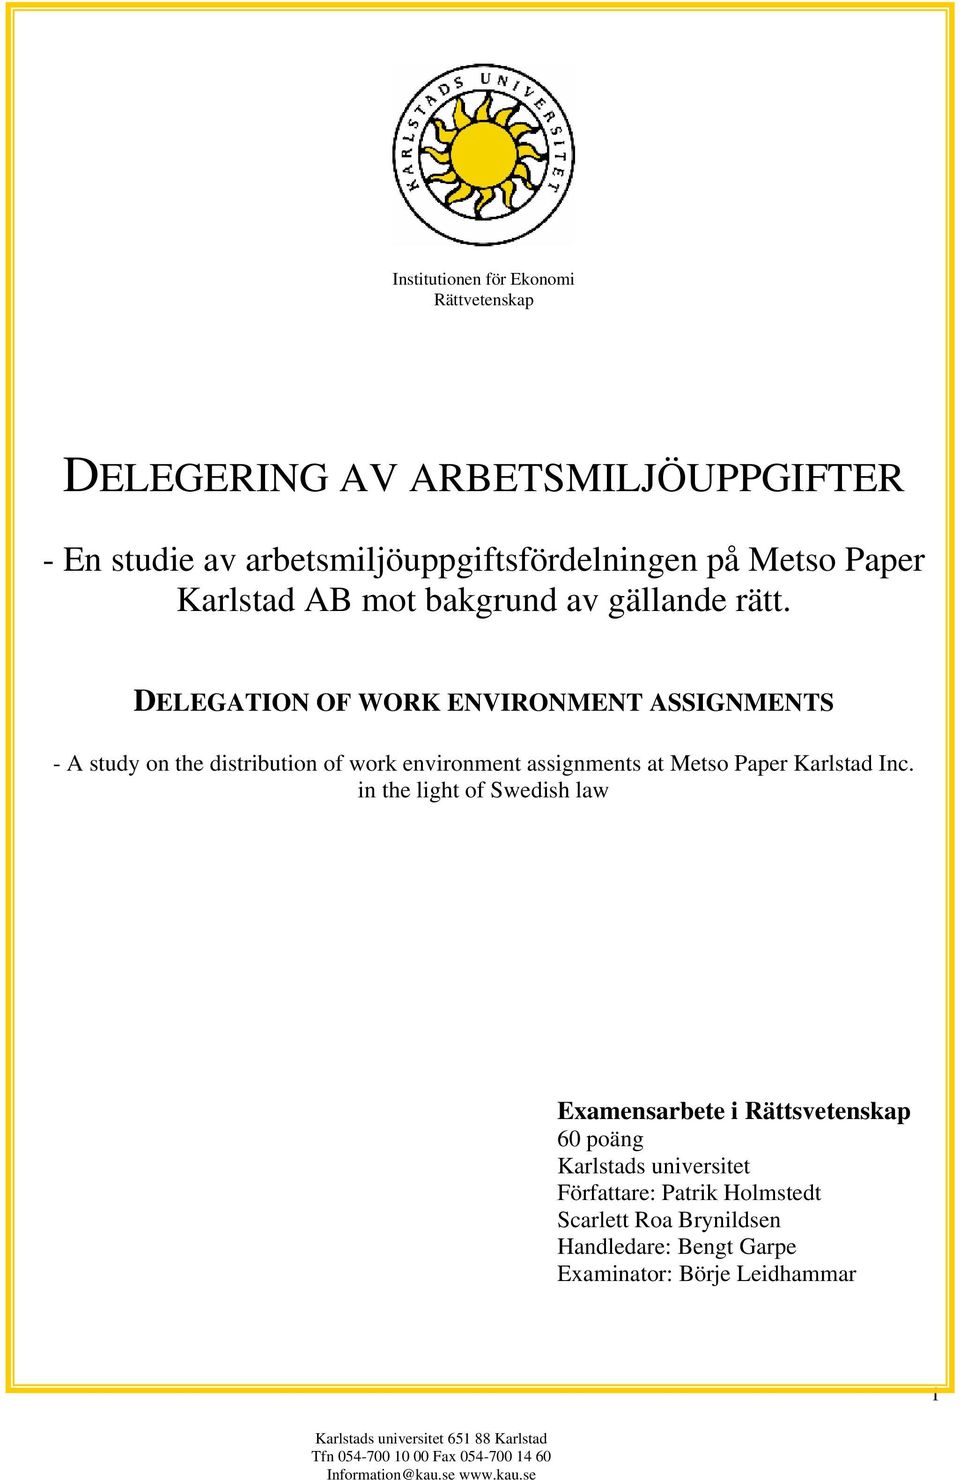 DELEGATION OF WORK ENVIRONMENT ASSIGNMENTS - A study on the distribution of work environment assignments at Metso Paper Karlstad Inc.